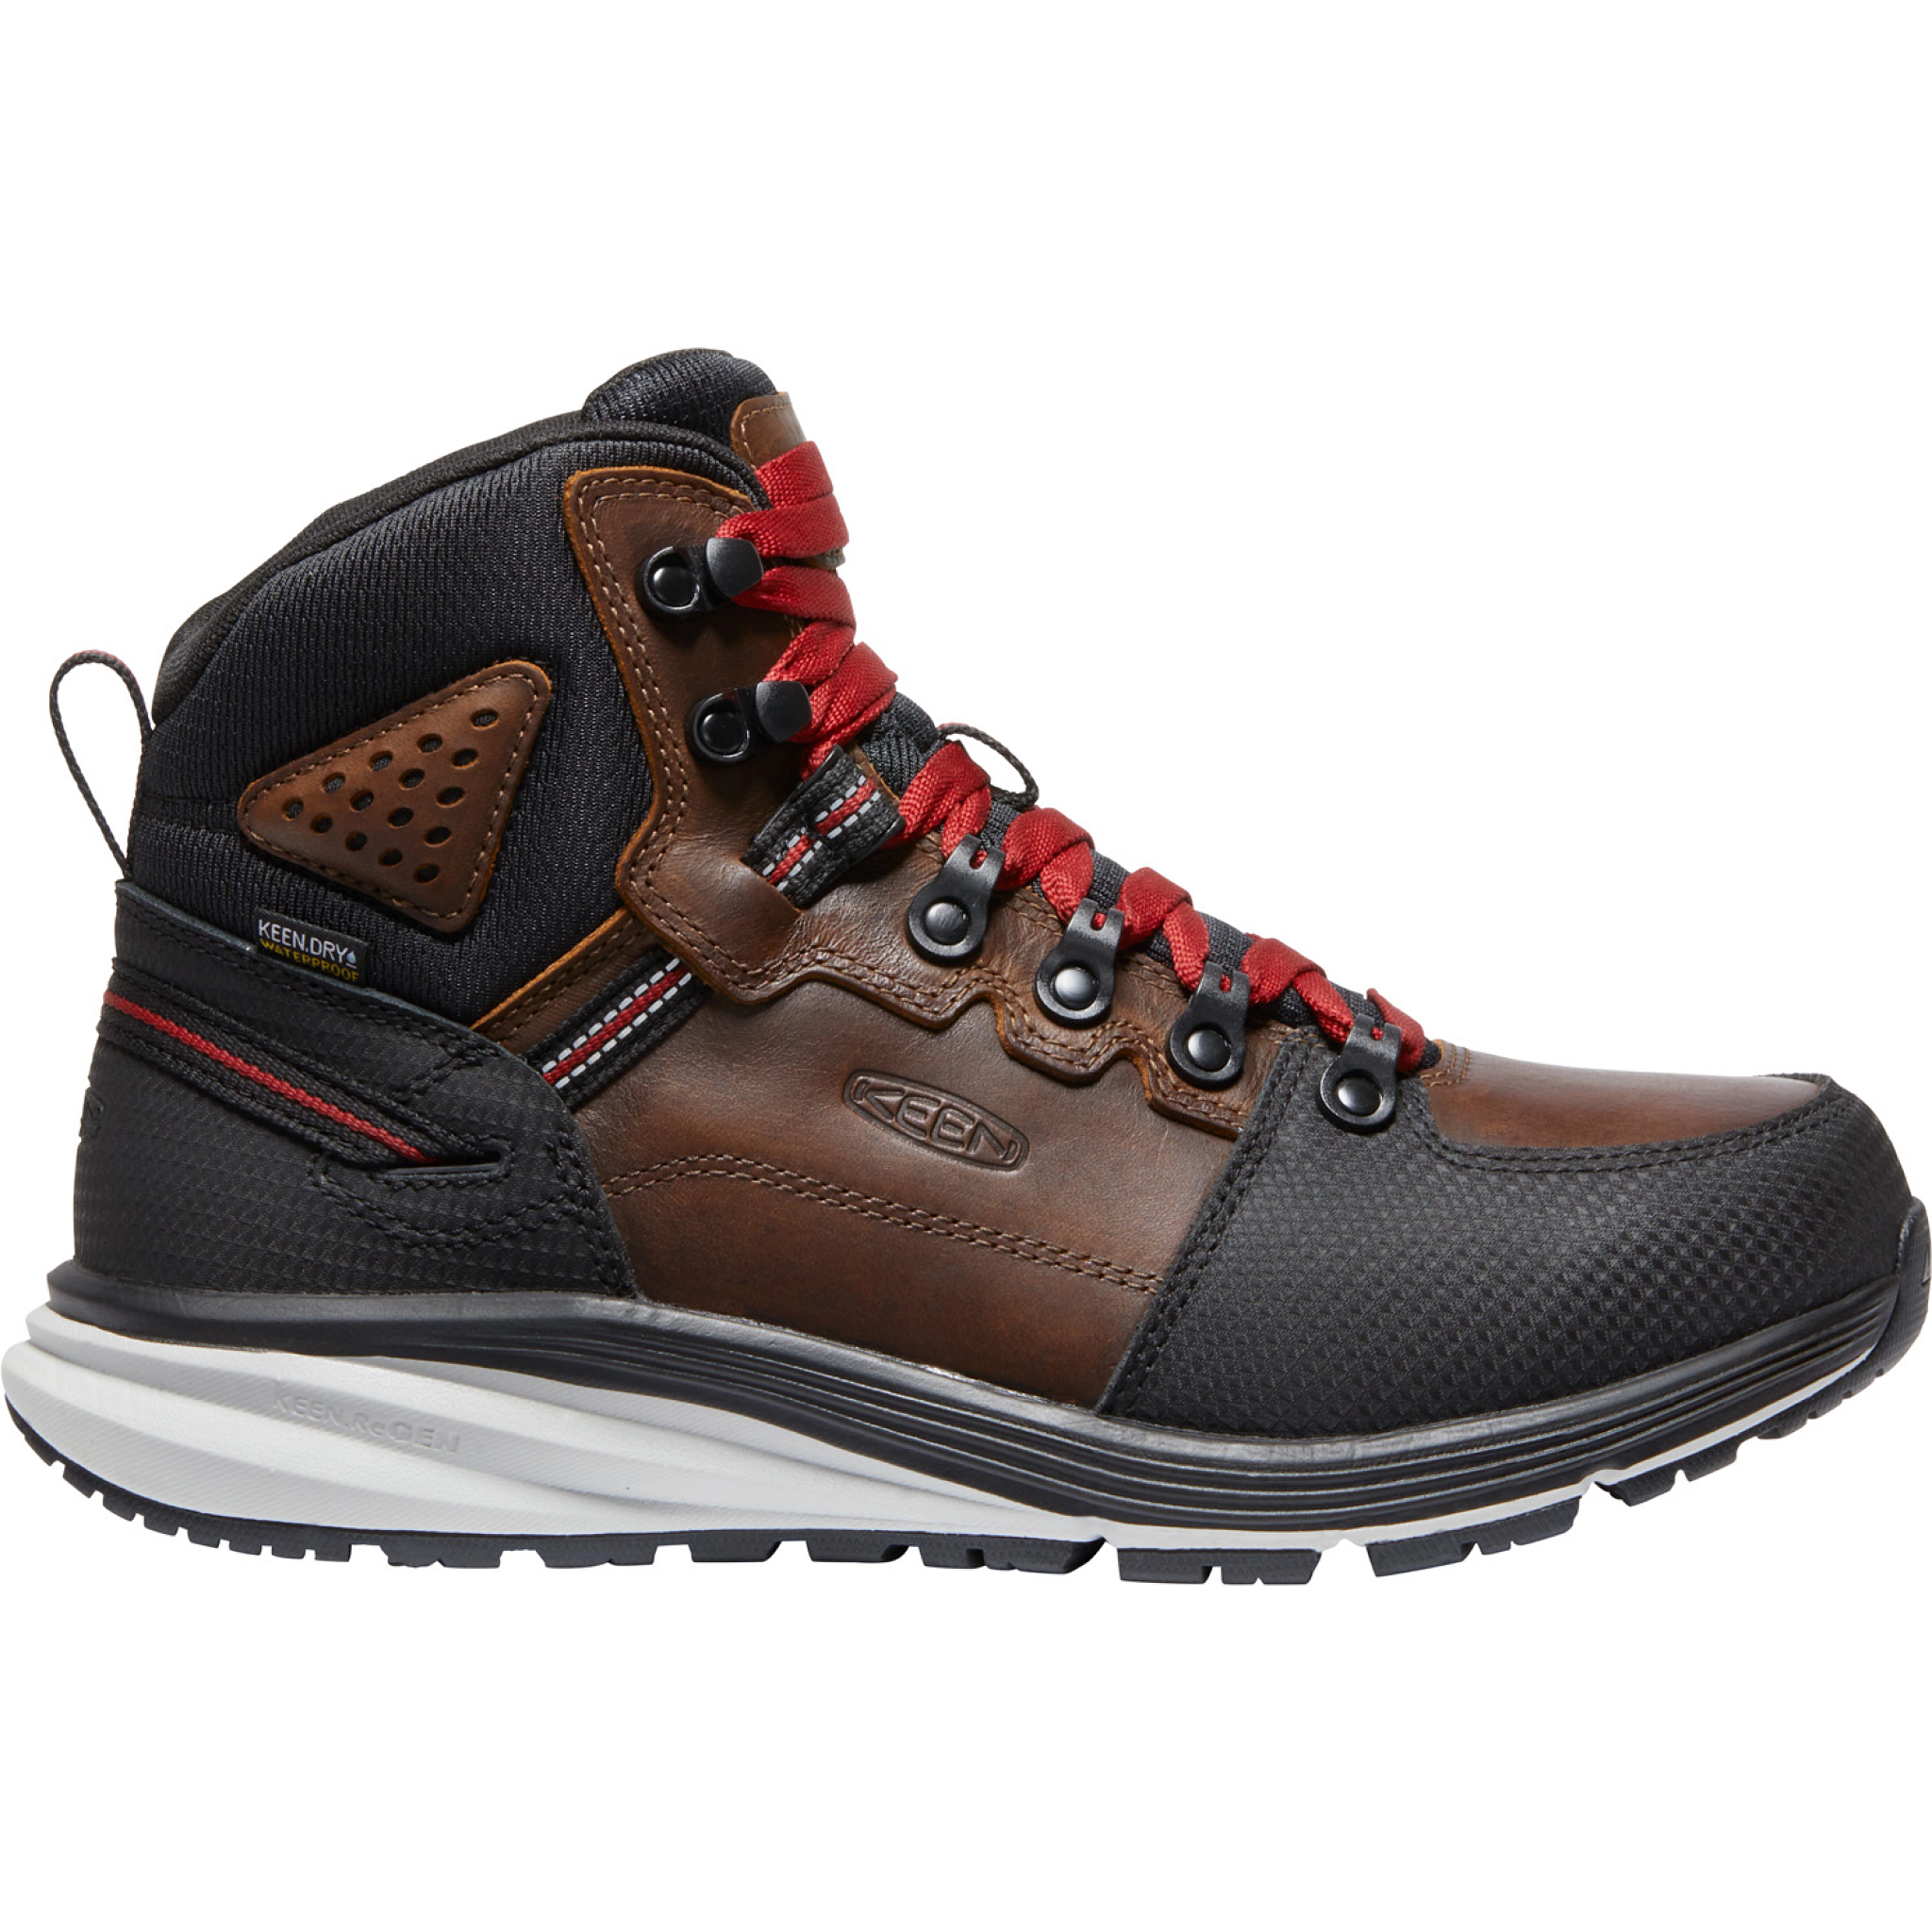 KEEN Utility Men's Red Hook Mid Soft Toe WP Work Boot Tobacco- 1025618  - Overlook Boots